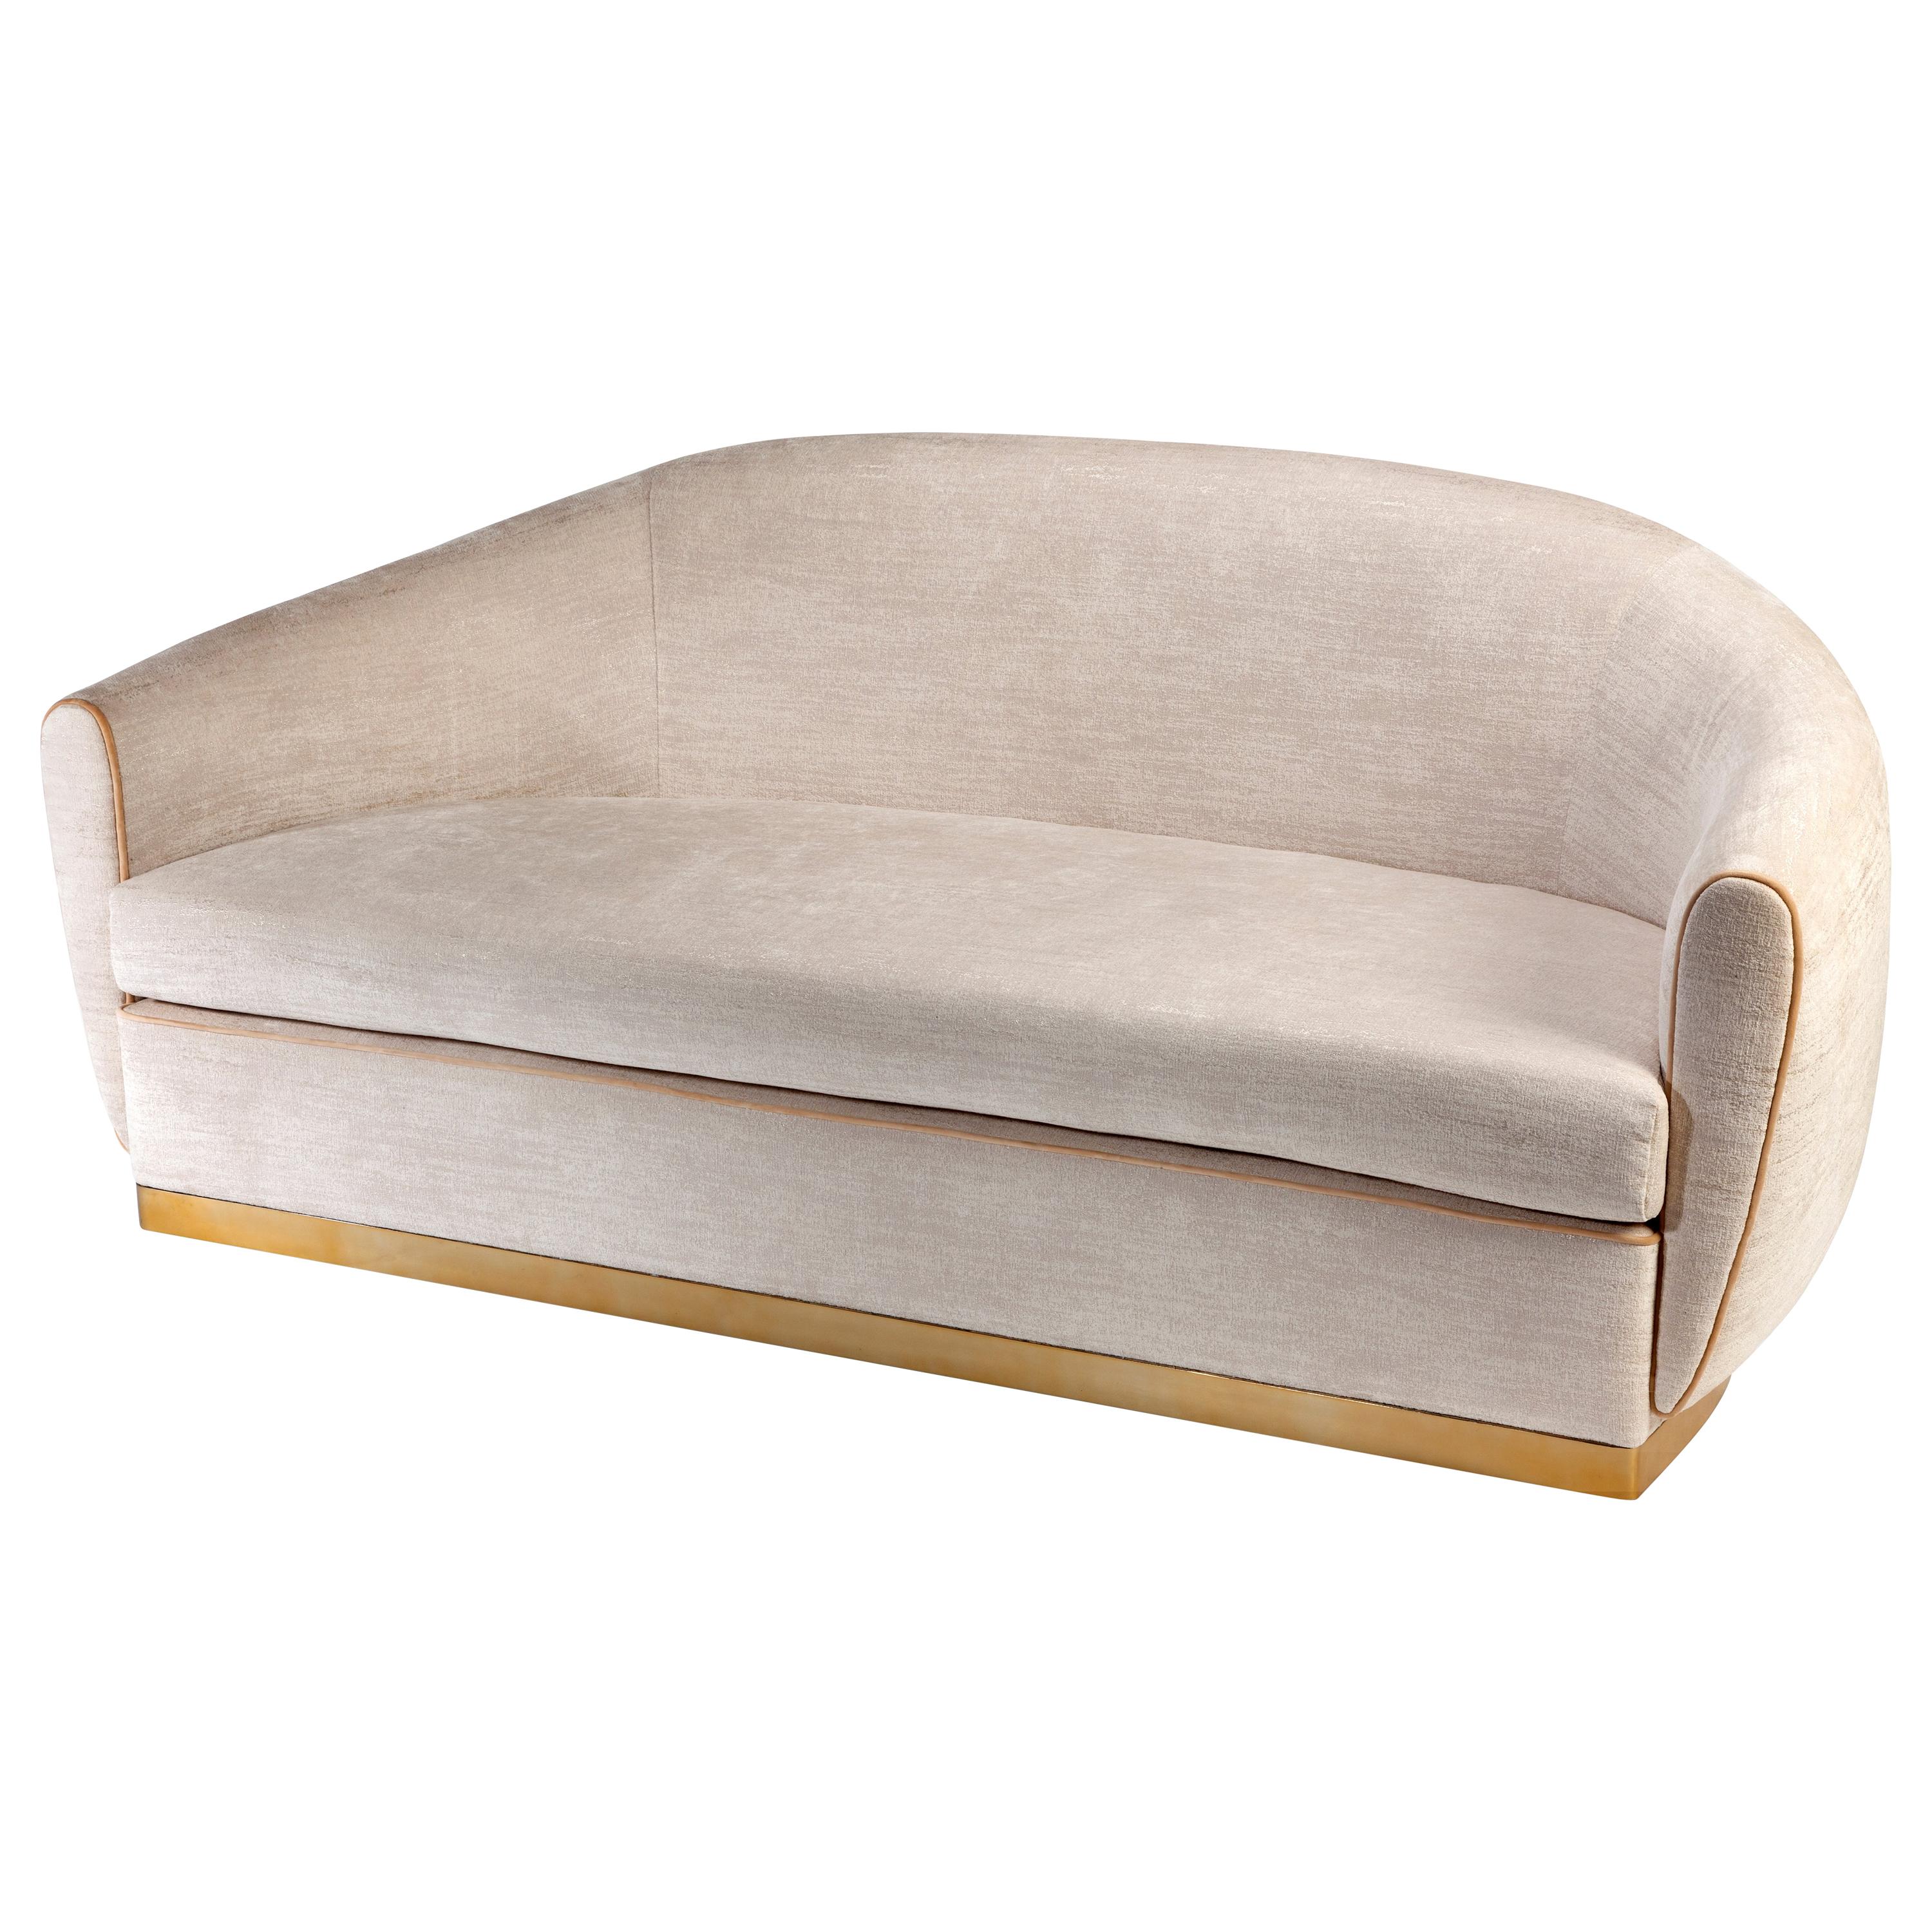 Sofa Grace 3-Seat in Beige Marka 10 Upholstery and Polished Brass Base